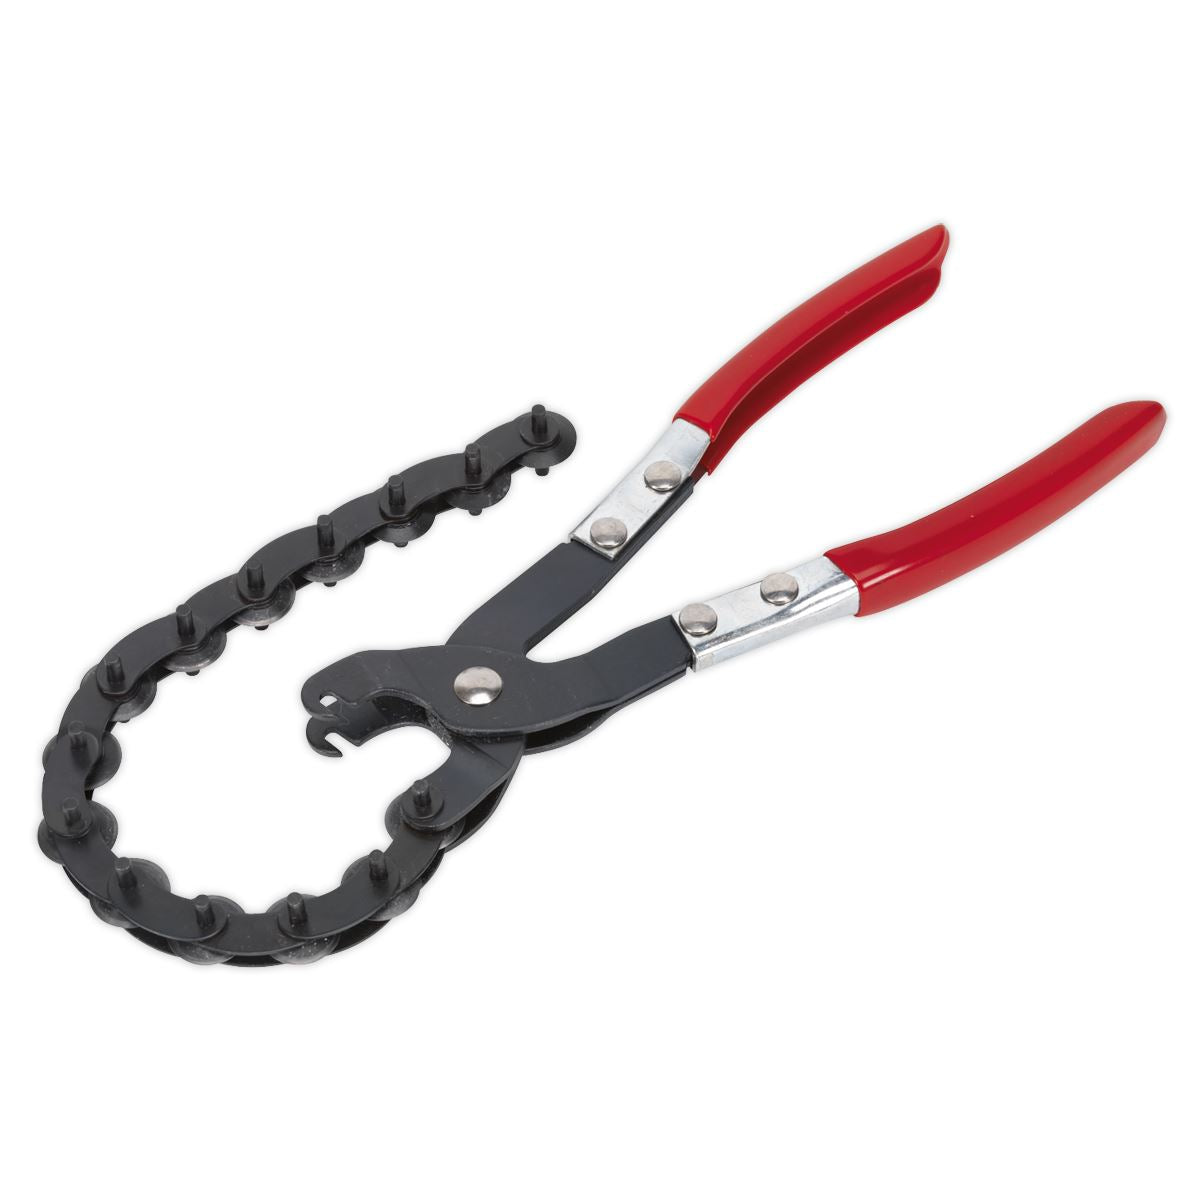 Sealey Exhaust Pipe Cutter Pliers